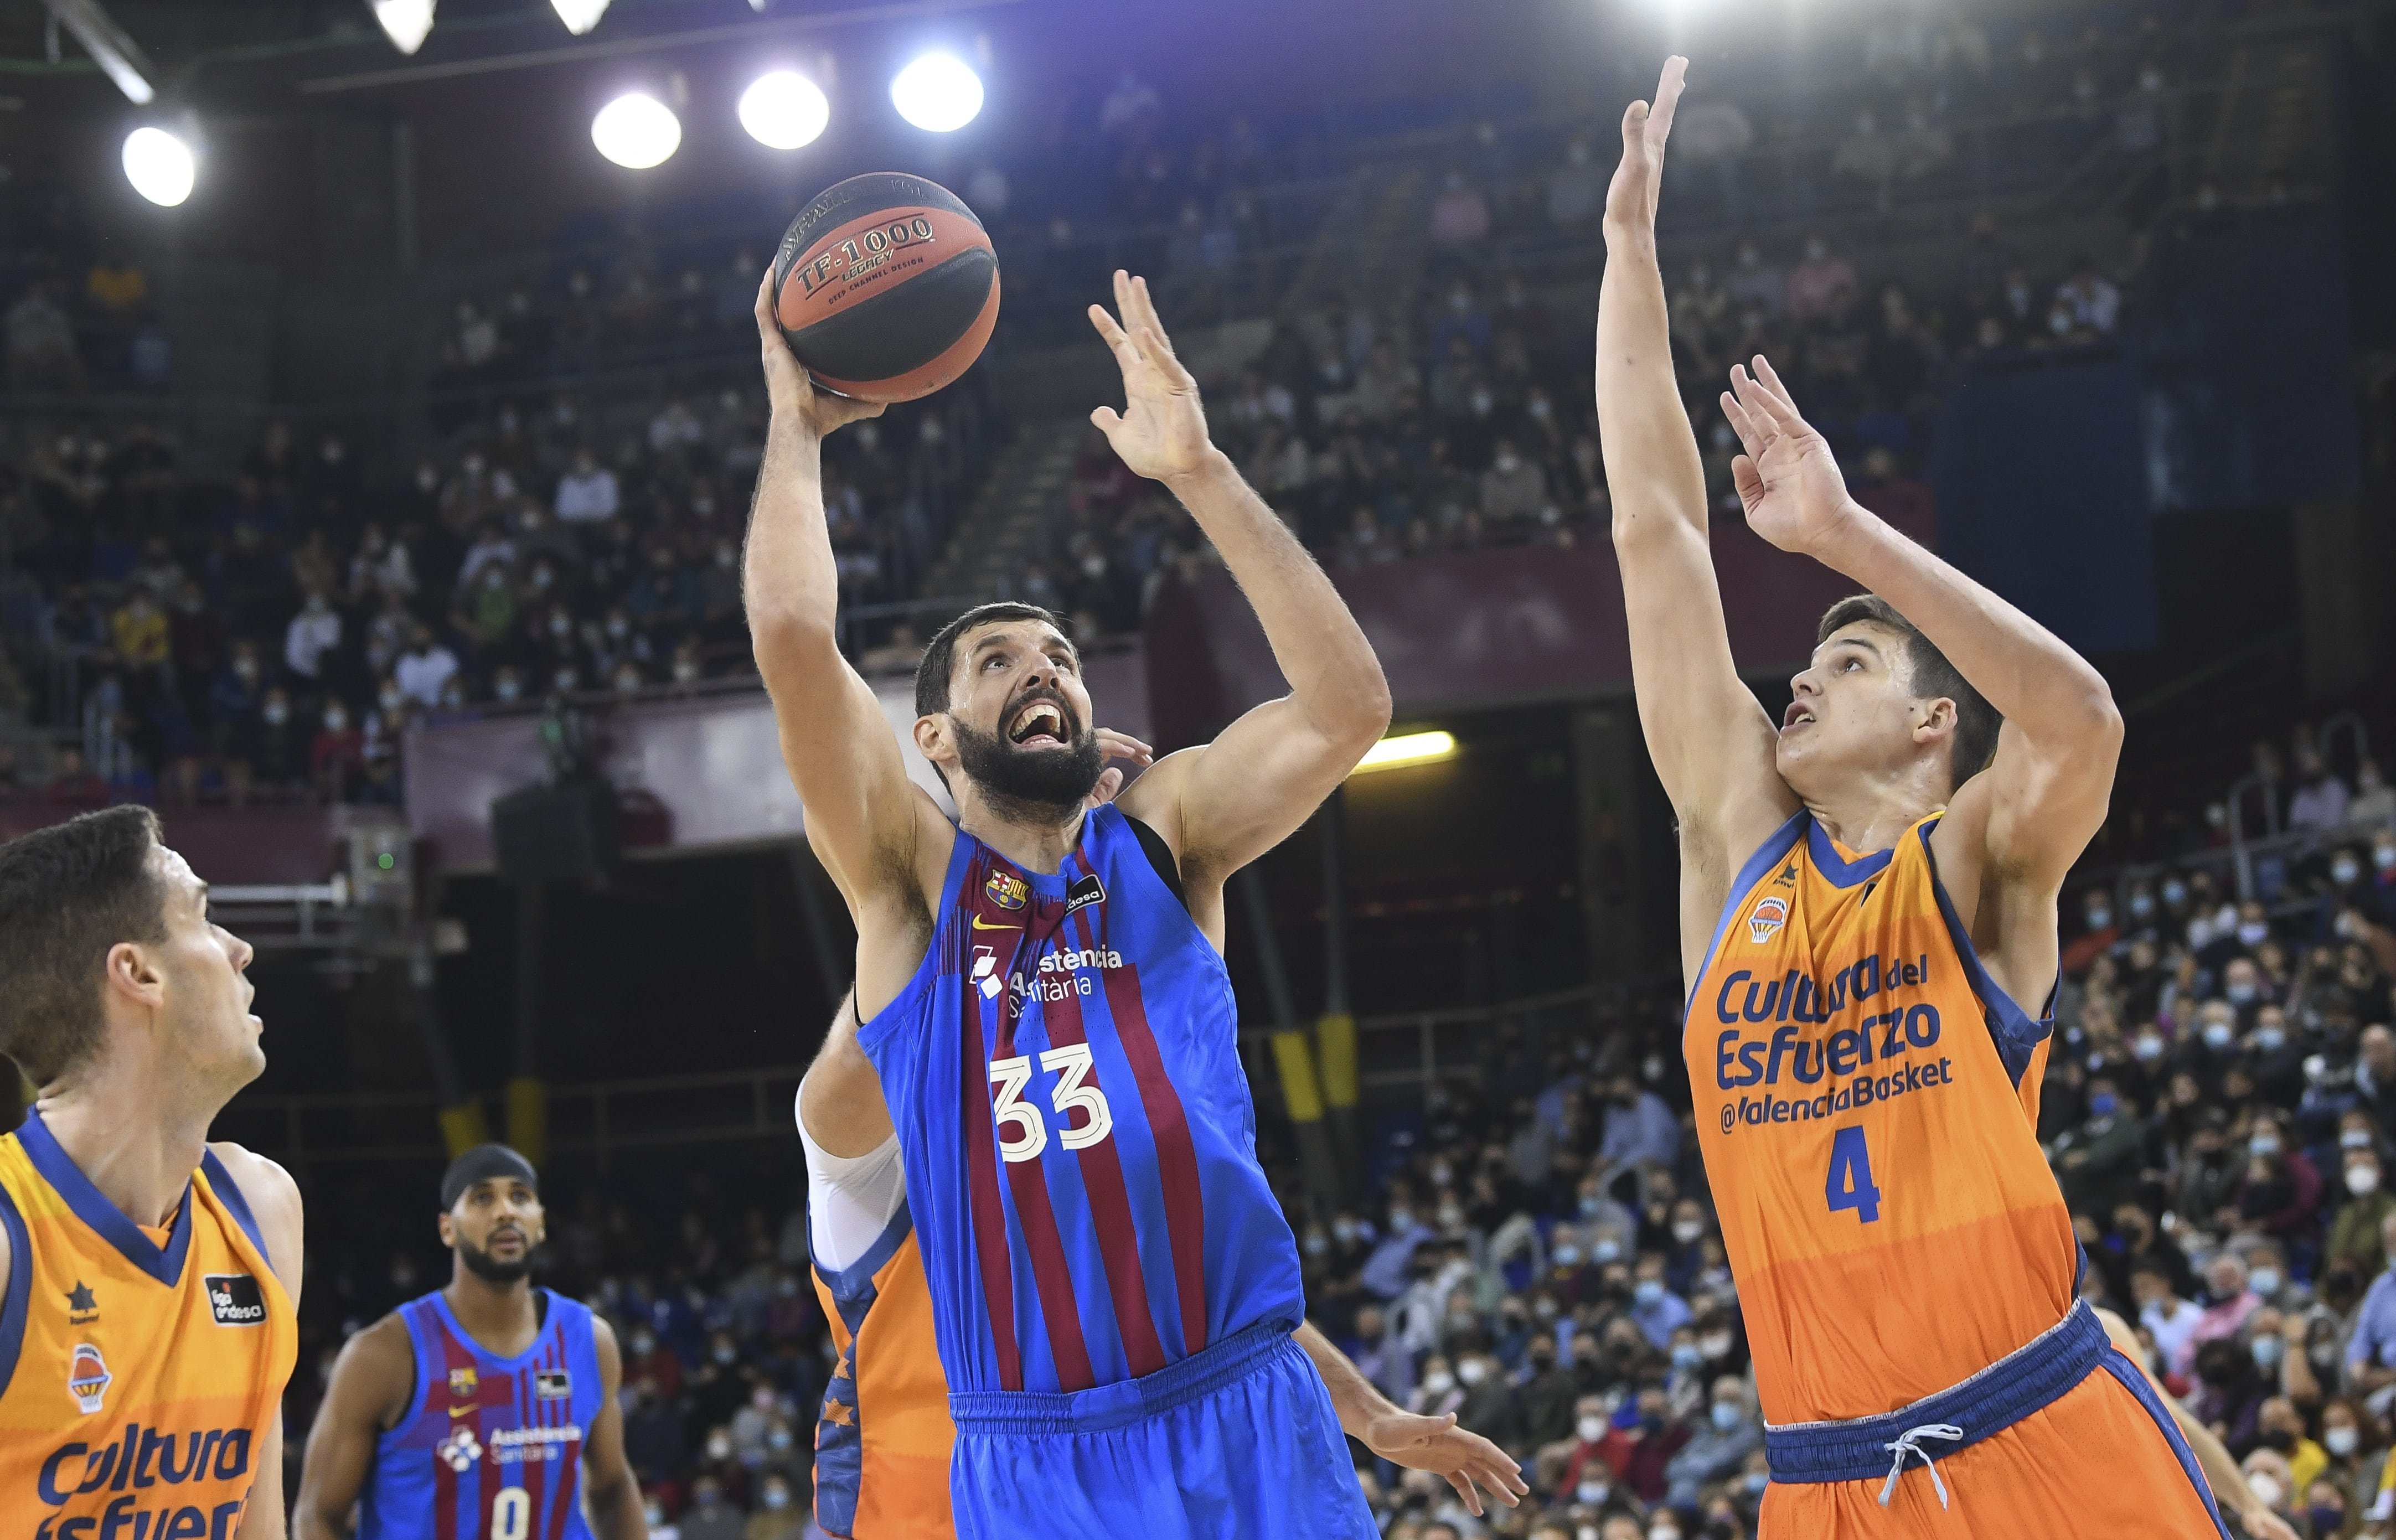 chauffør Styrke Ondartet tumor Barça 79–87 Valencia Basket: Unbeaten record comes to an end in the league